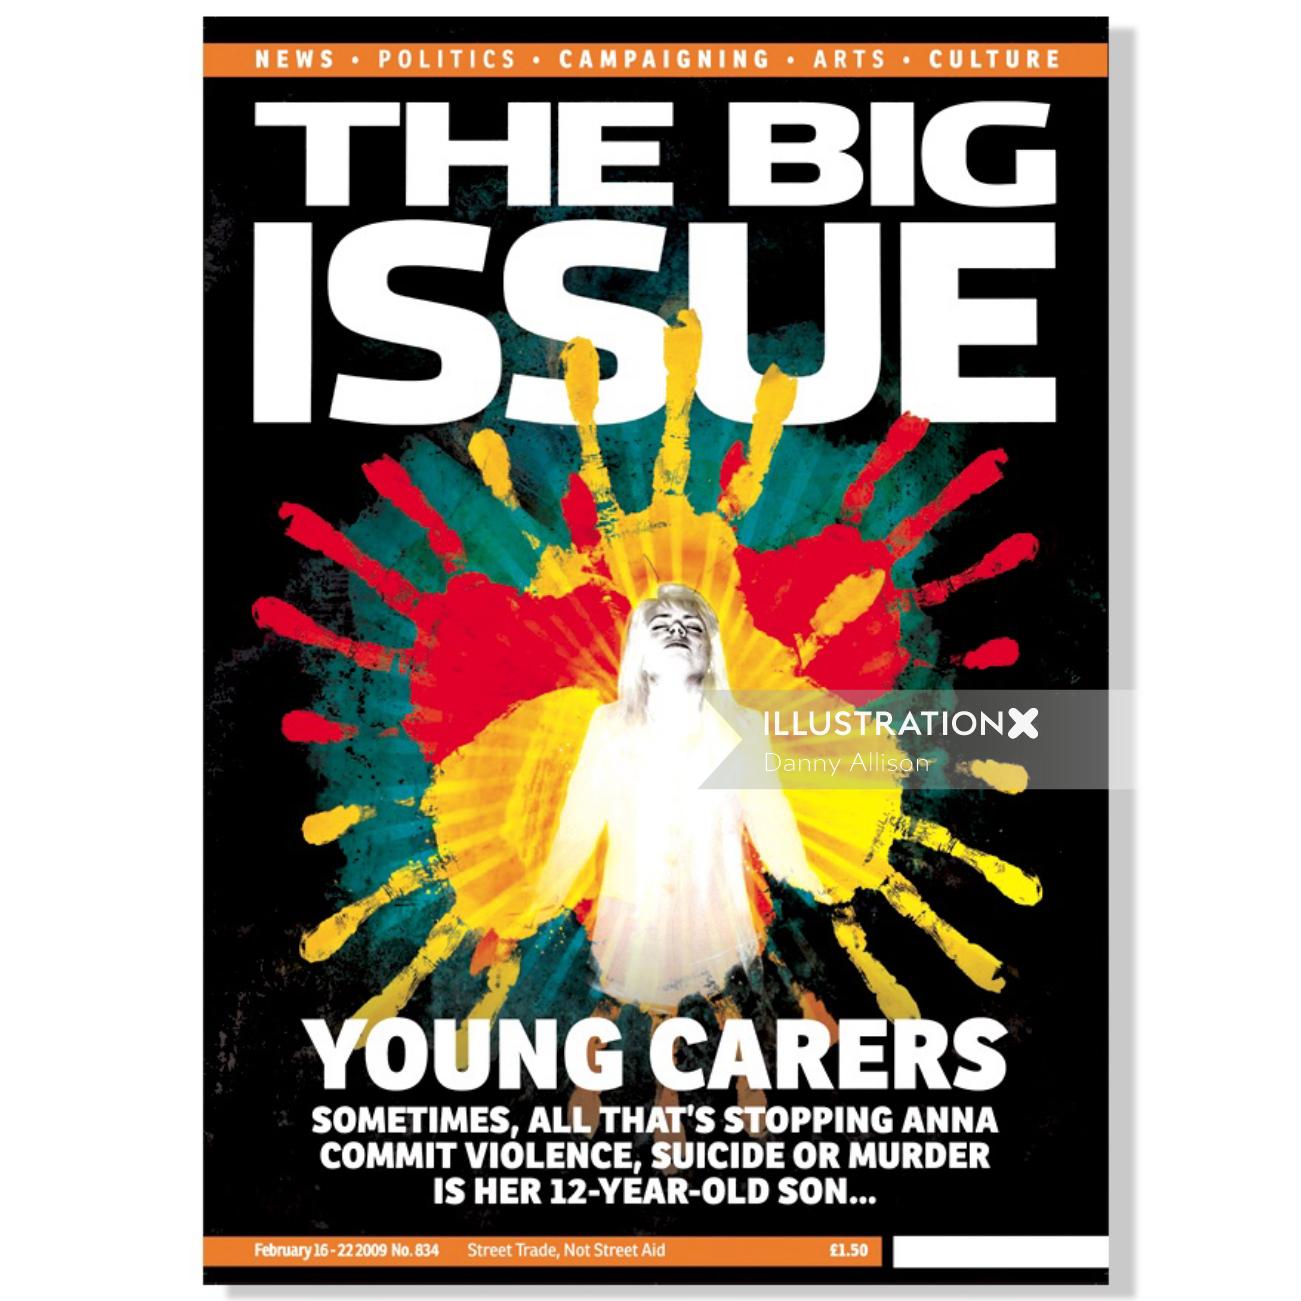 The Big Issue Magazine cover, Helping Children symbol on the page